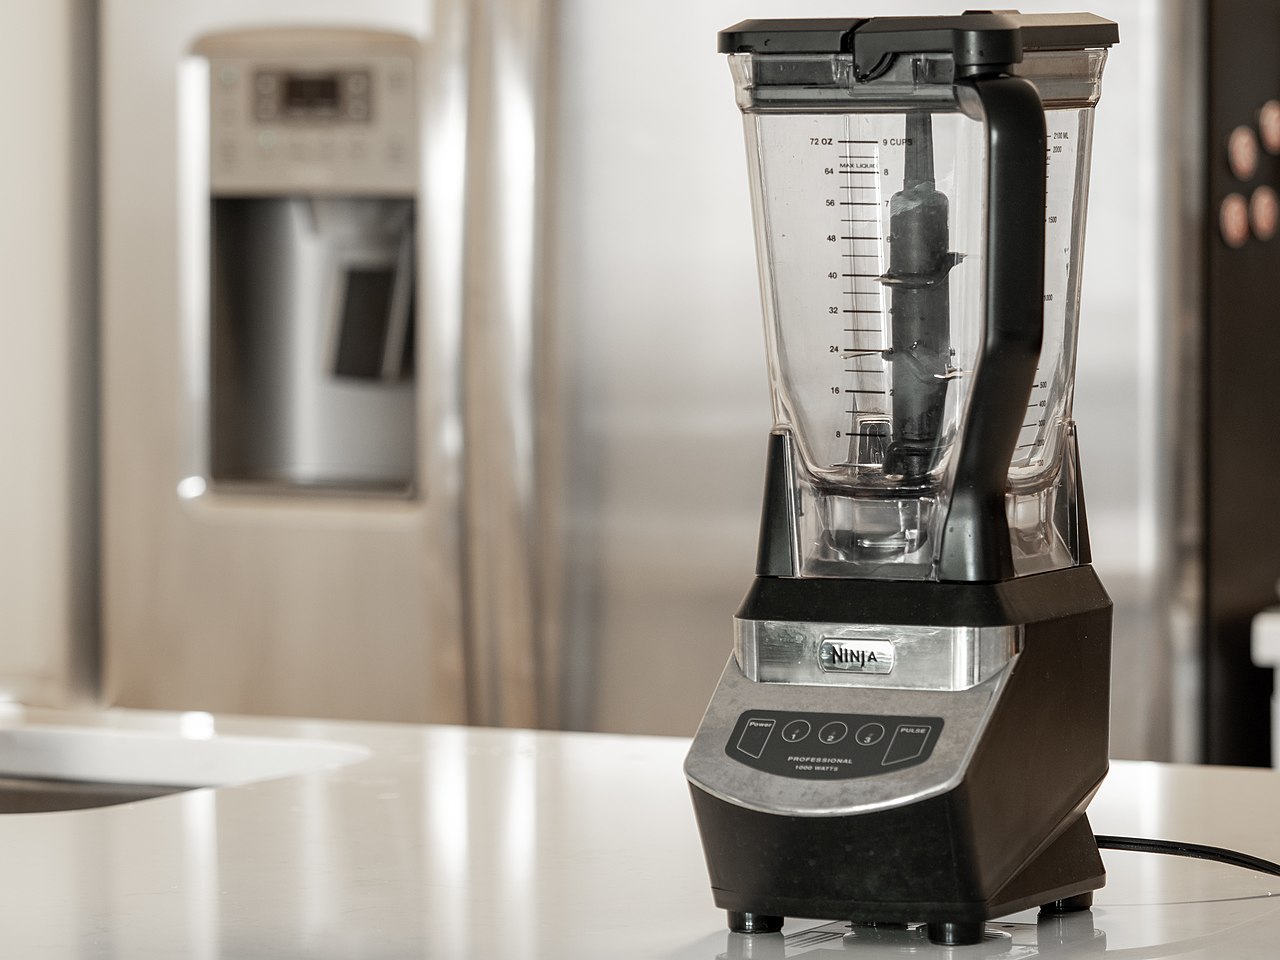 A picture of a blender sitting on a kitchen counter.